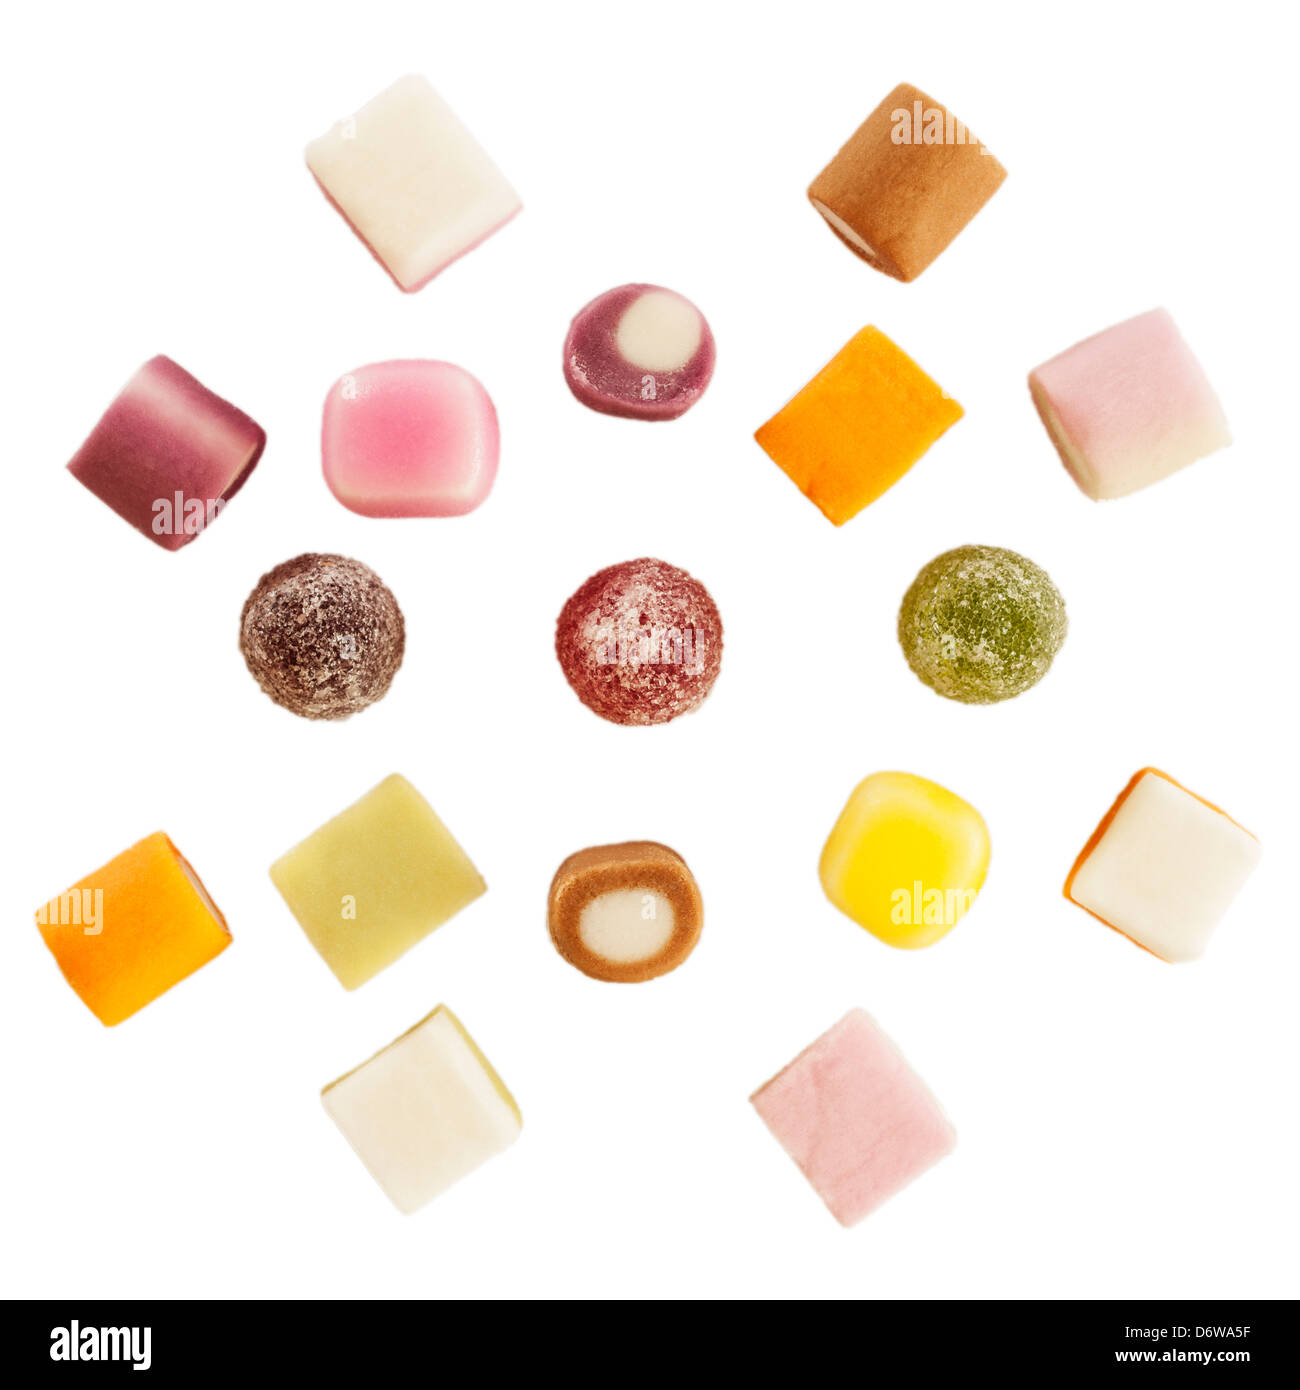 A selection of Dolly mixtures sweets candy on a white background Stock Photo